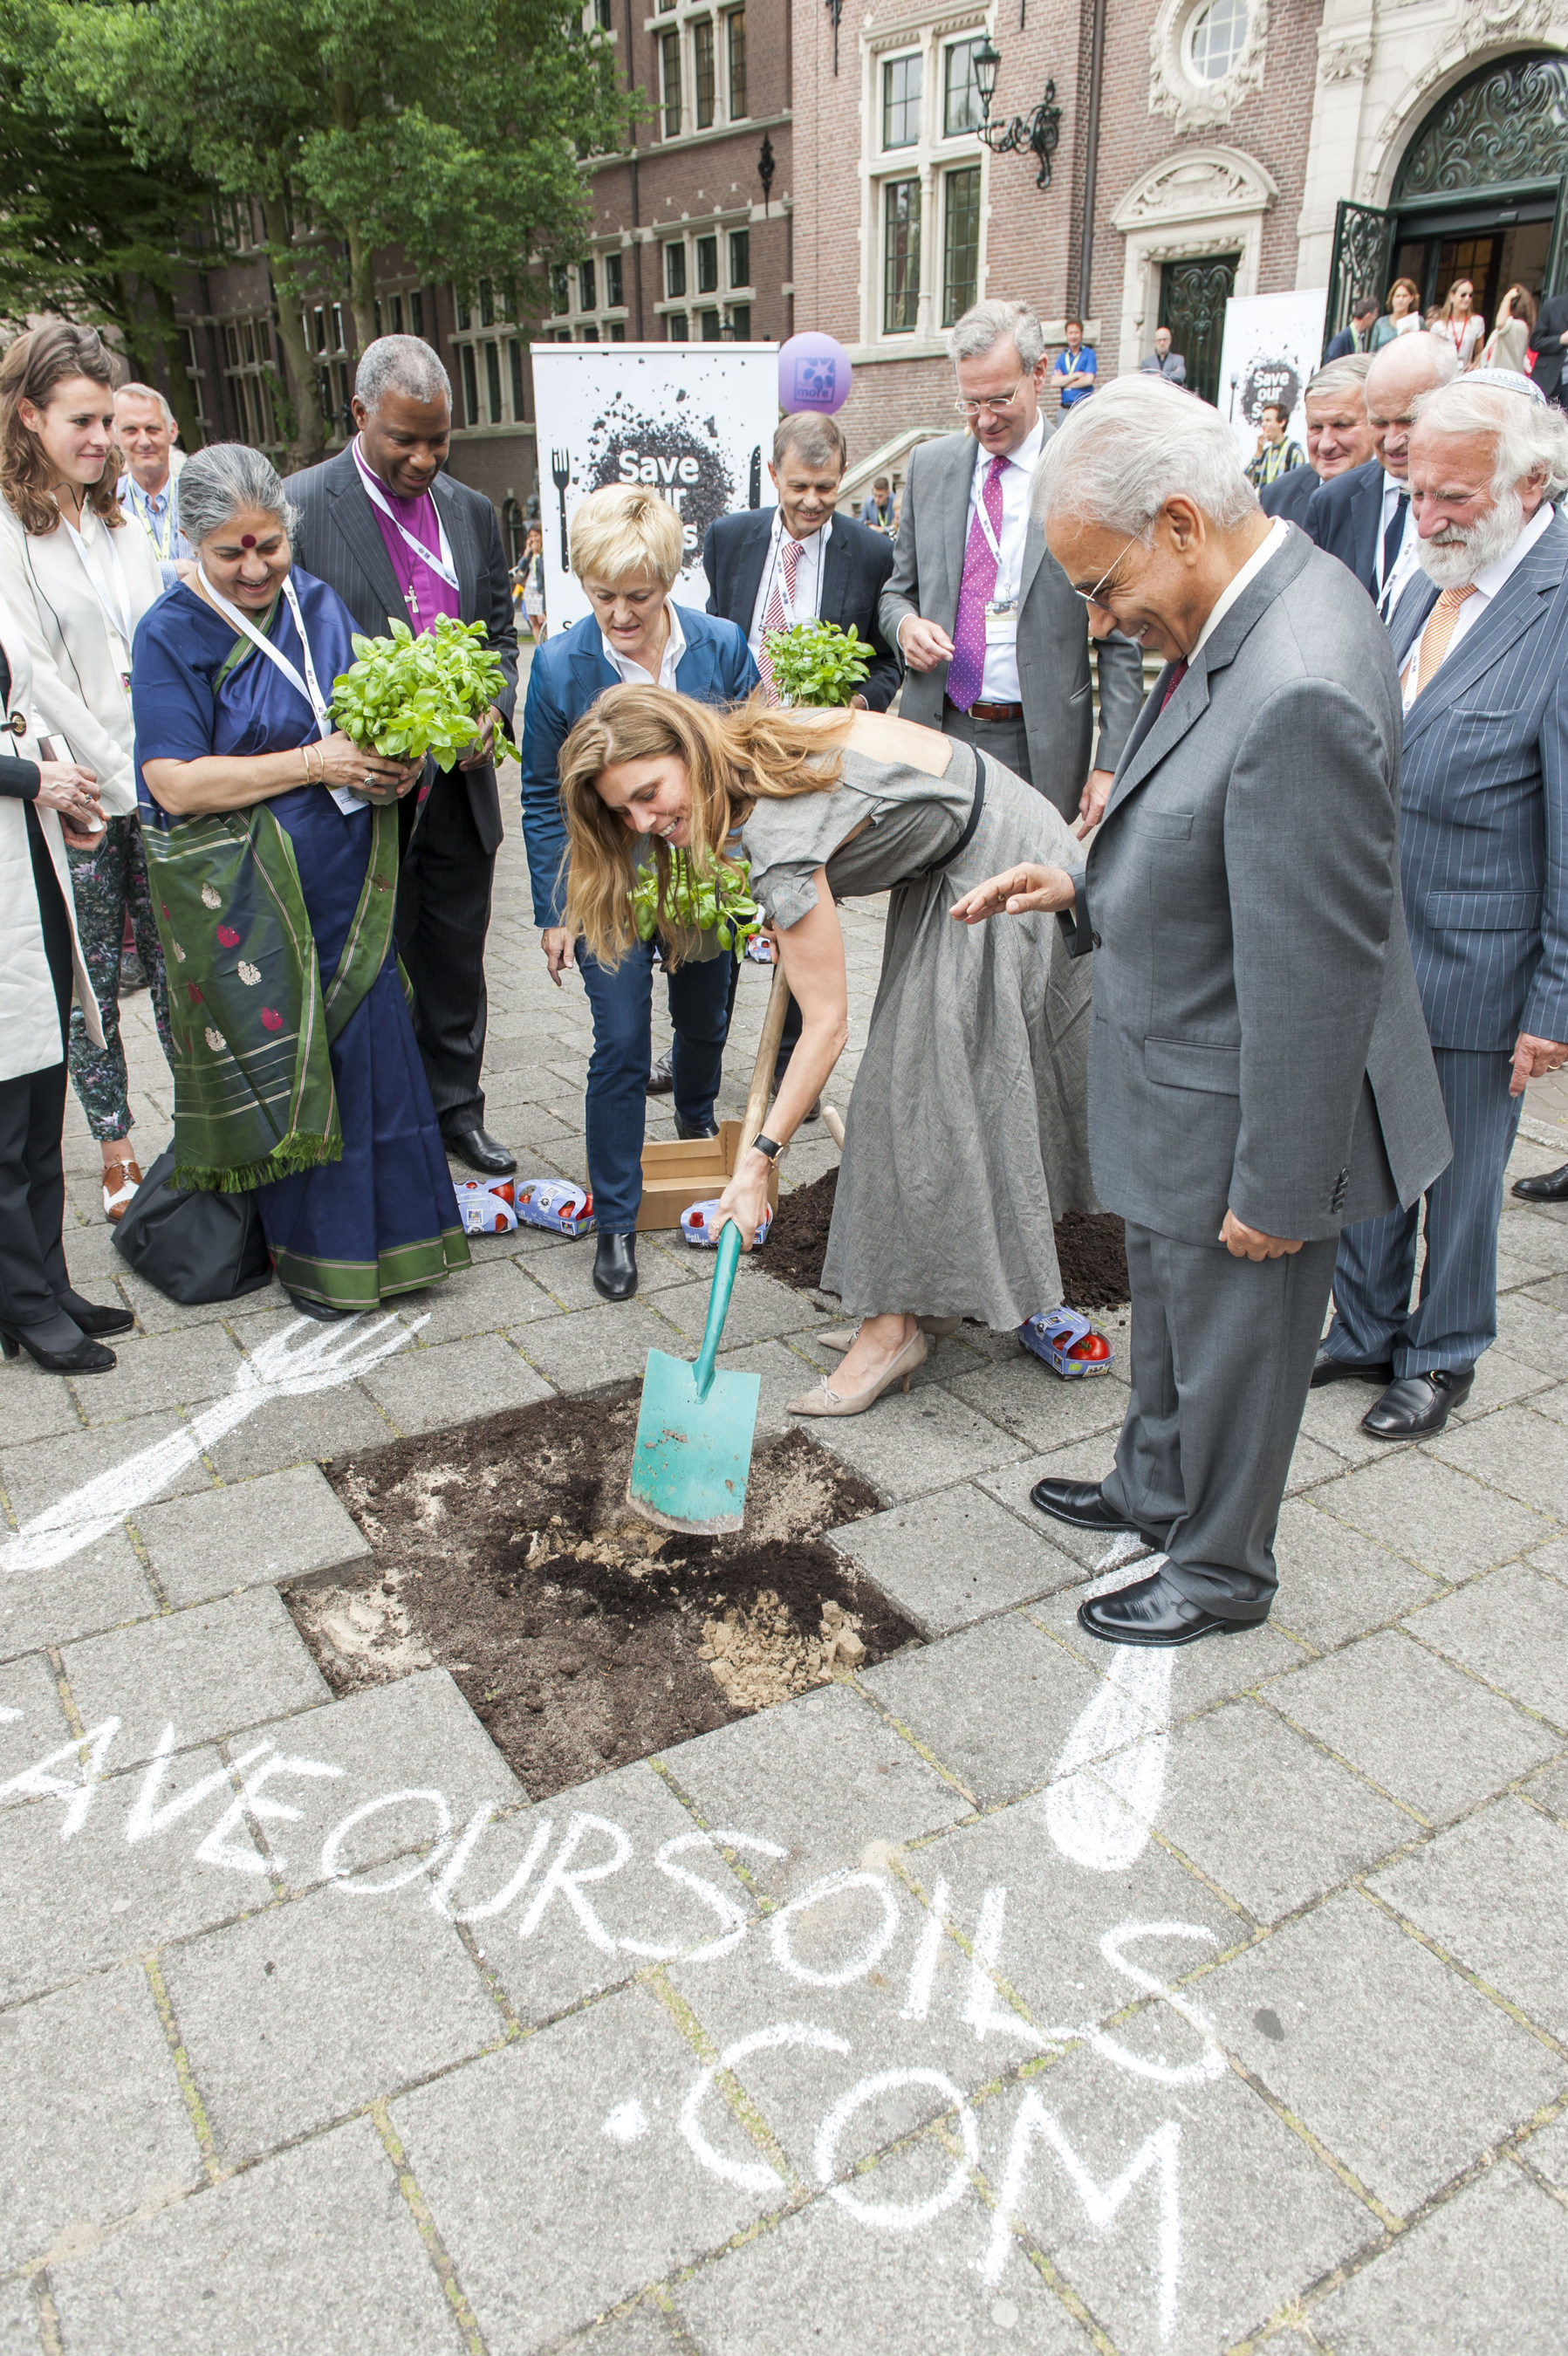 In a guerrilla gardening action in the heart of Amsterdam, German TV-cook Sarah Wiener is wielding the spade. Around her, from left to right are Joszi Smeets of the Youth Food Movement, Vandana Shiva, archbishop Thabo Makgoba, Renate Kunast, Andre Leu of IFOAM, Volkert Engelsman of Nature & More, Ibrahim Abouleish of SEKEM (front), GÃƒÂ¶tz Rehn of Alnatura and Rabbi Soetendorp. (PRNewsFoto/Nature & More / Save Our Soils) (PRNewsFoto/Nature & More / Save Our Soils)